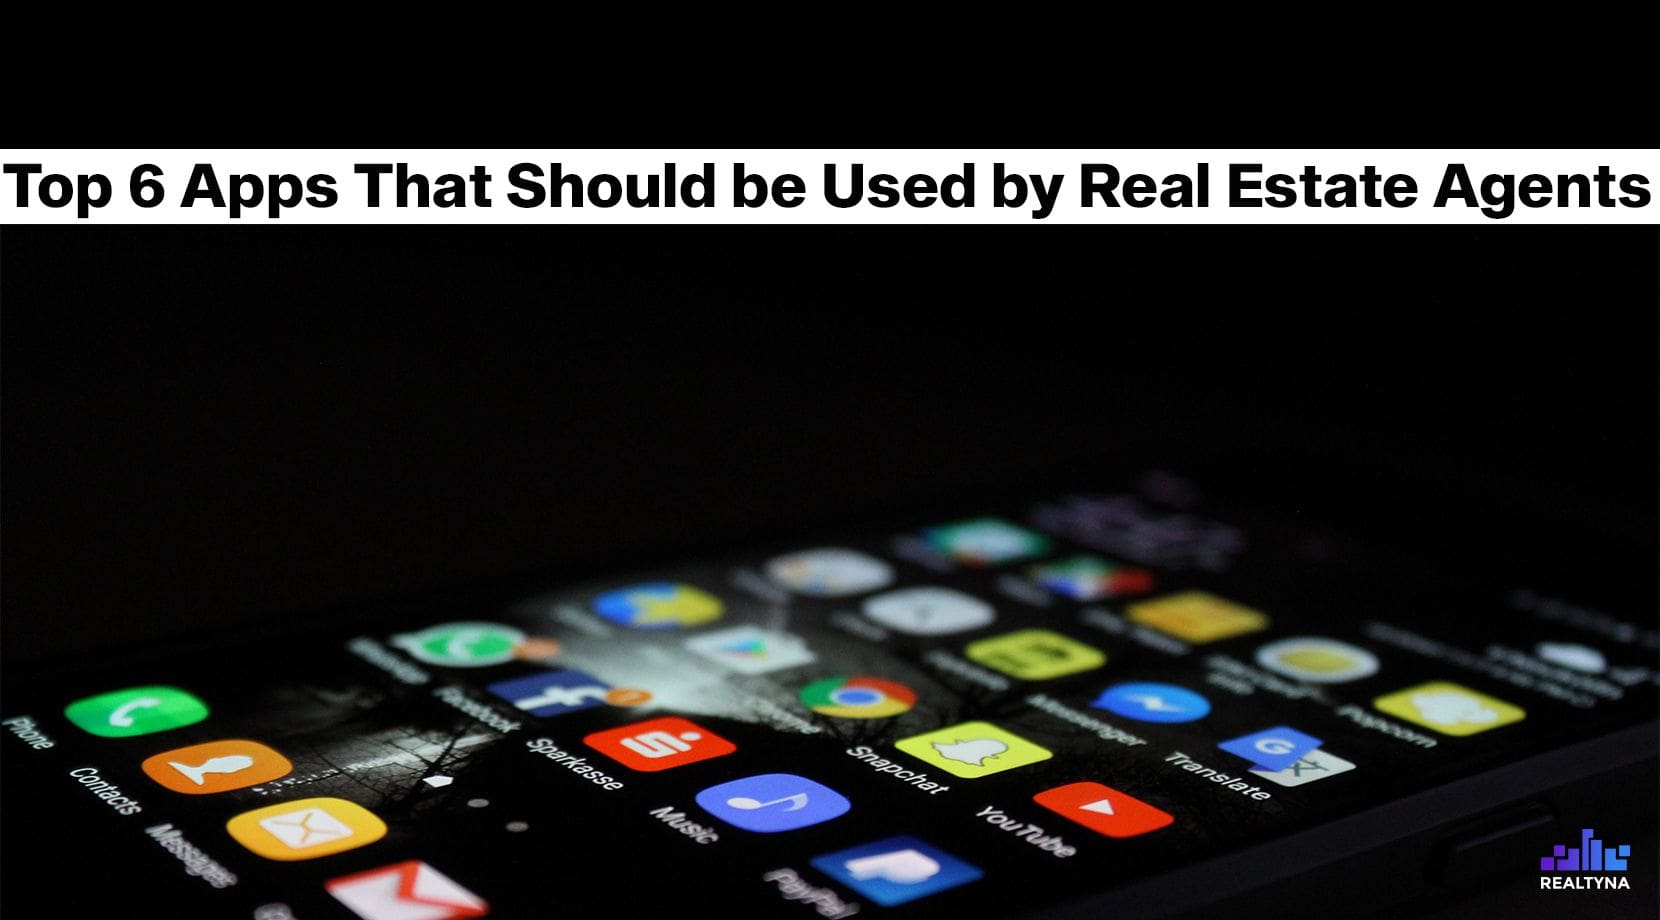 Top 6 Apps That Should be Used By Real Estate Agents